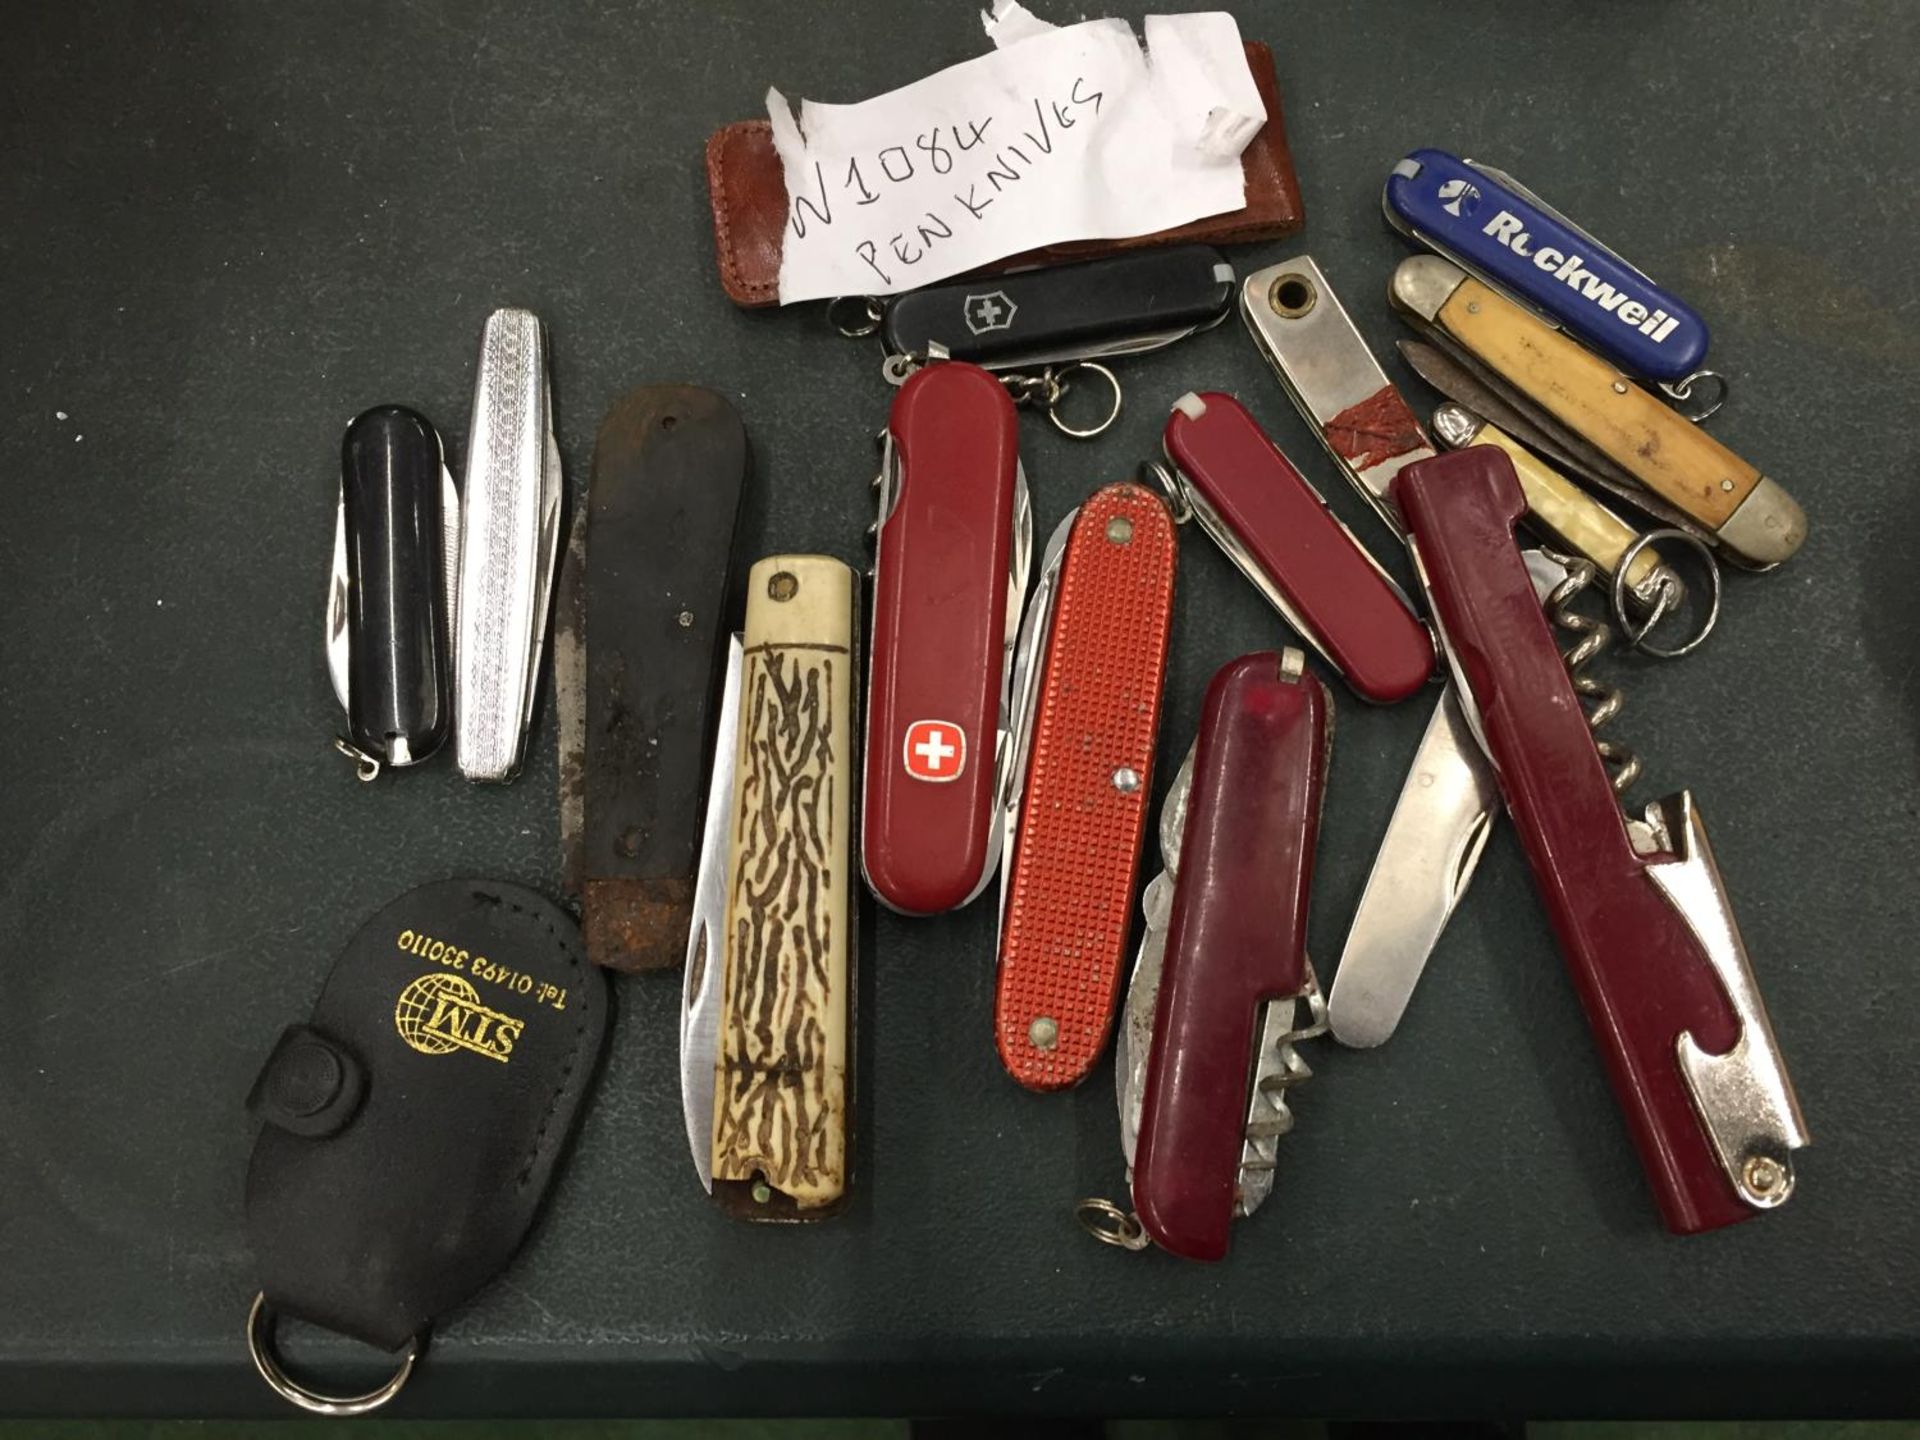 A COLLECTION OF VINTAGE PENKNIVES TO INCLUDE GENUINE SWISS ARMY KNIFE